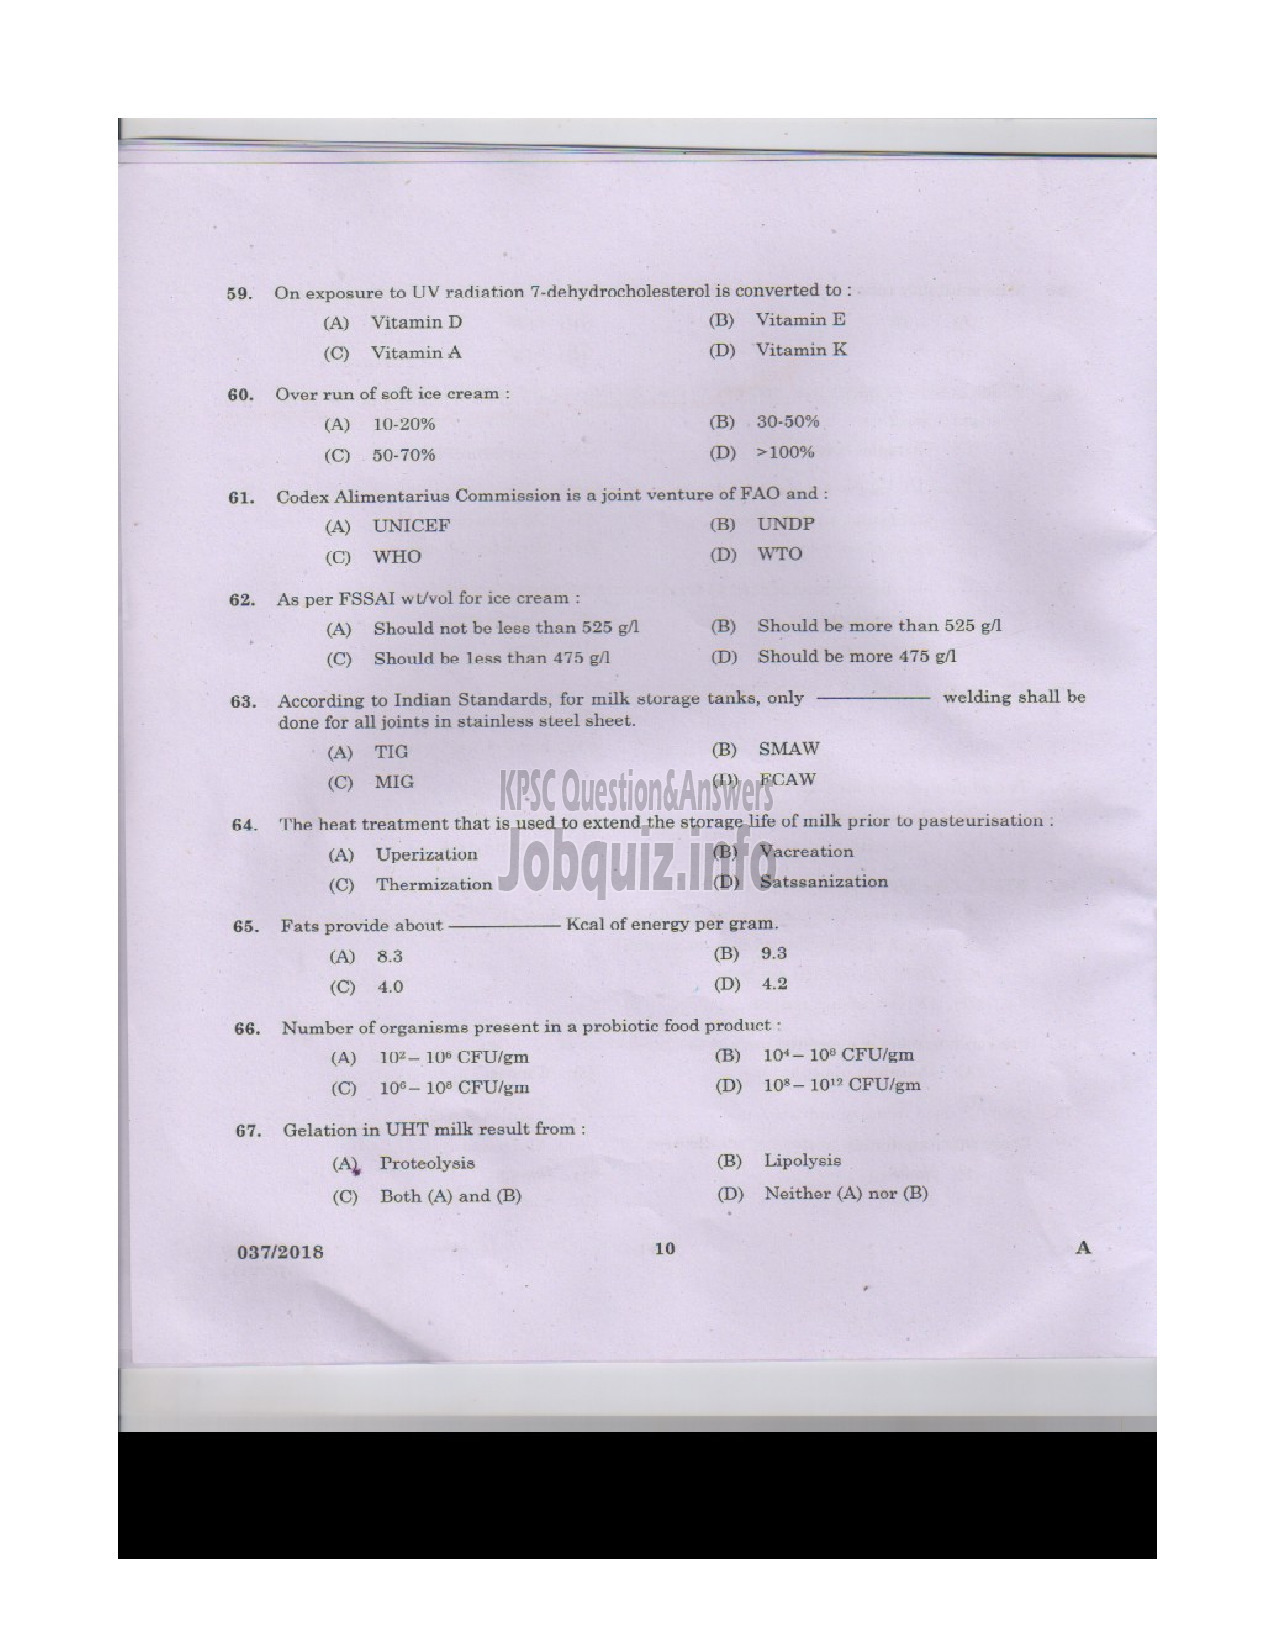 Kerala PSC Question Paper - VOCATIONAL INSTRUCTOR IN DAIRYING MILK PRODUCTS VHSE-9